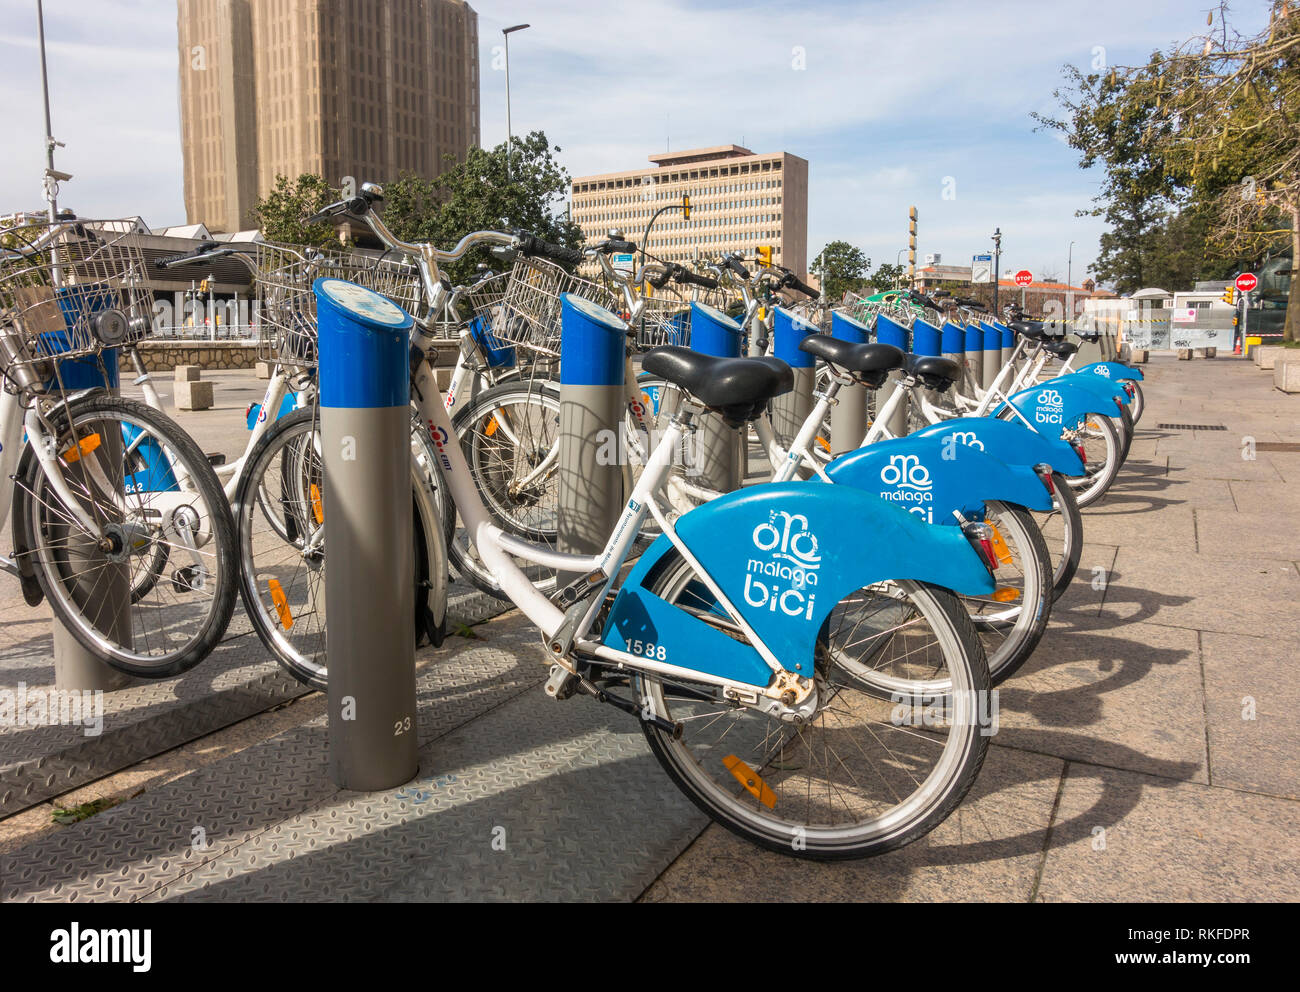 Malaga spain, Row of blue Malaga Bici, public bicycles renting system station in Malaga, Andalusia, Spain. Stock Photo